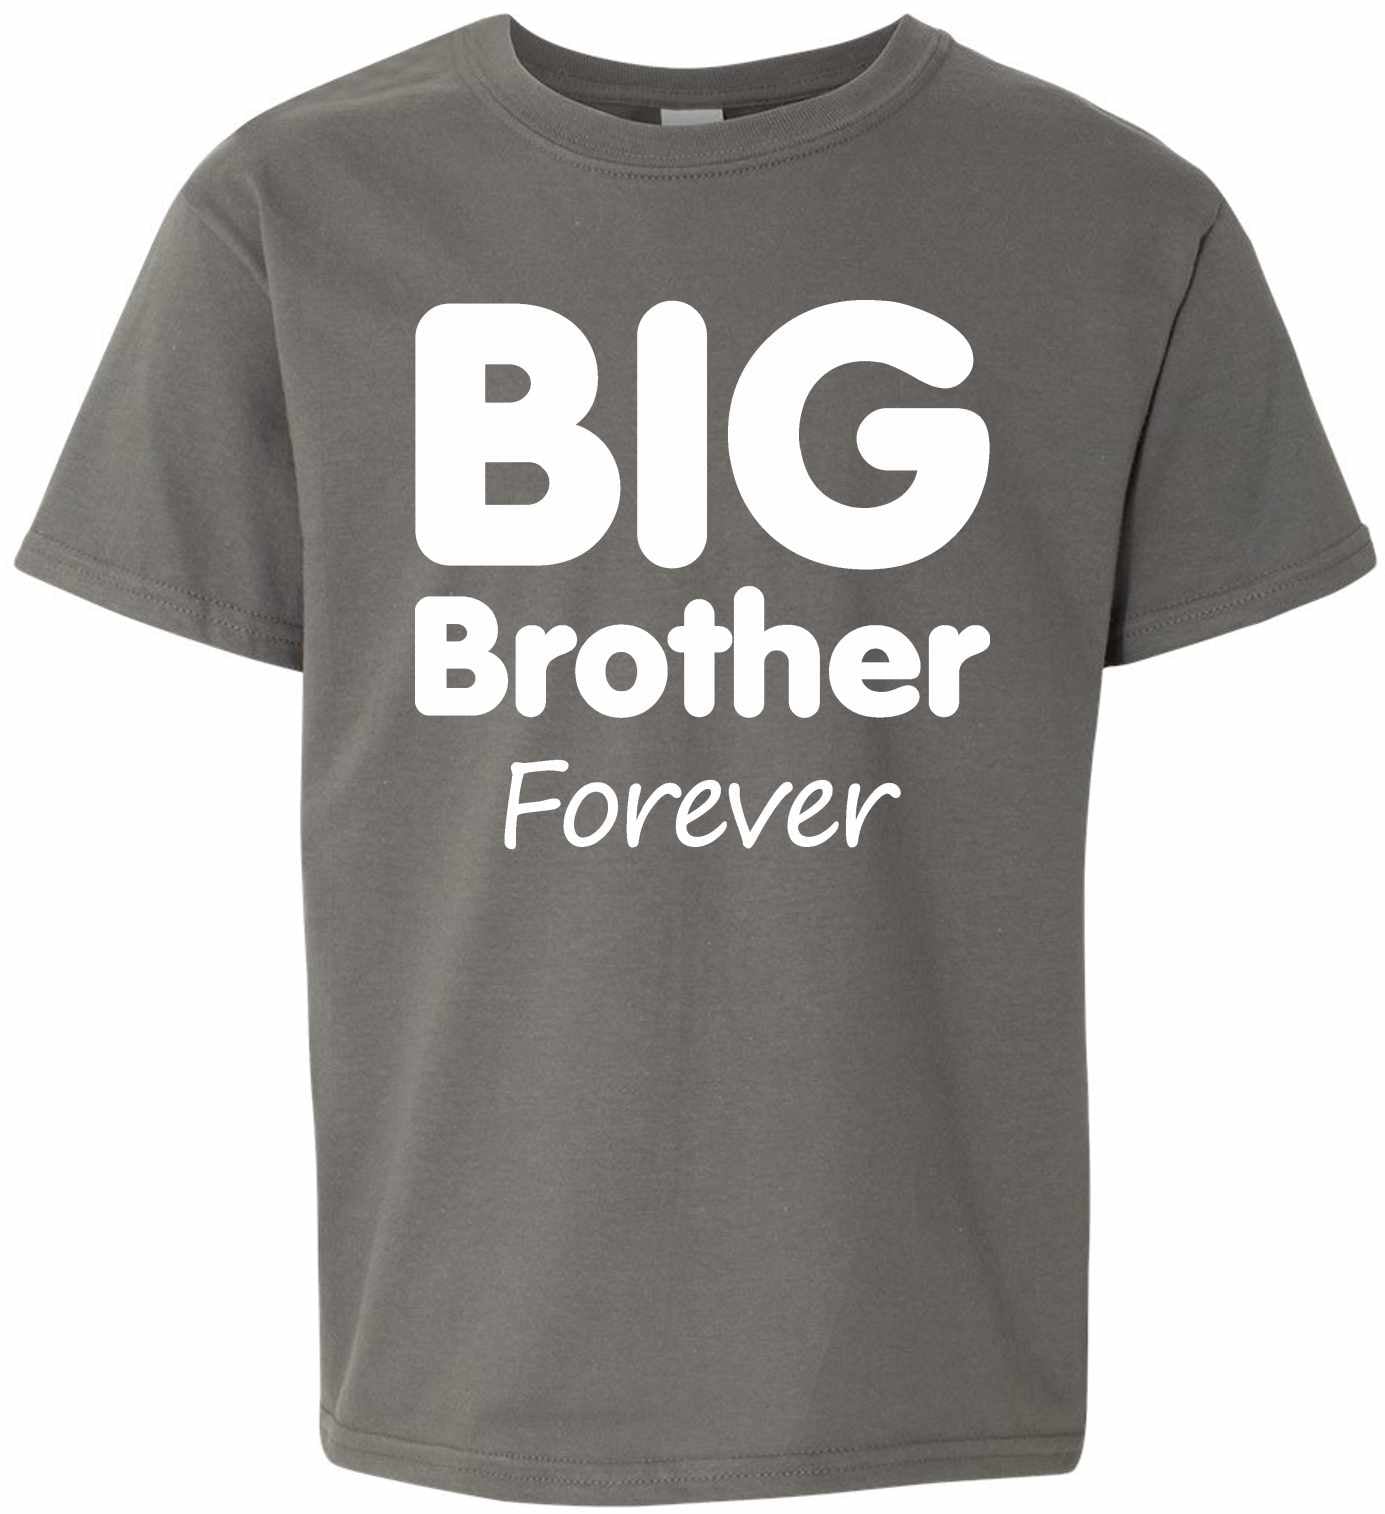 Big Brother Forever on Youth T-Shirt (#952-201)